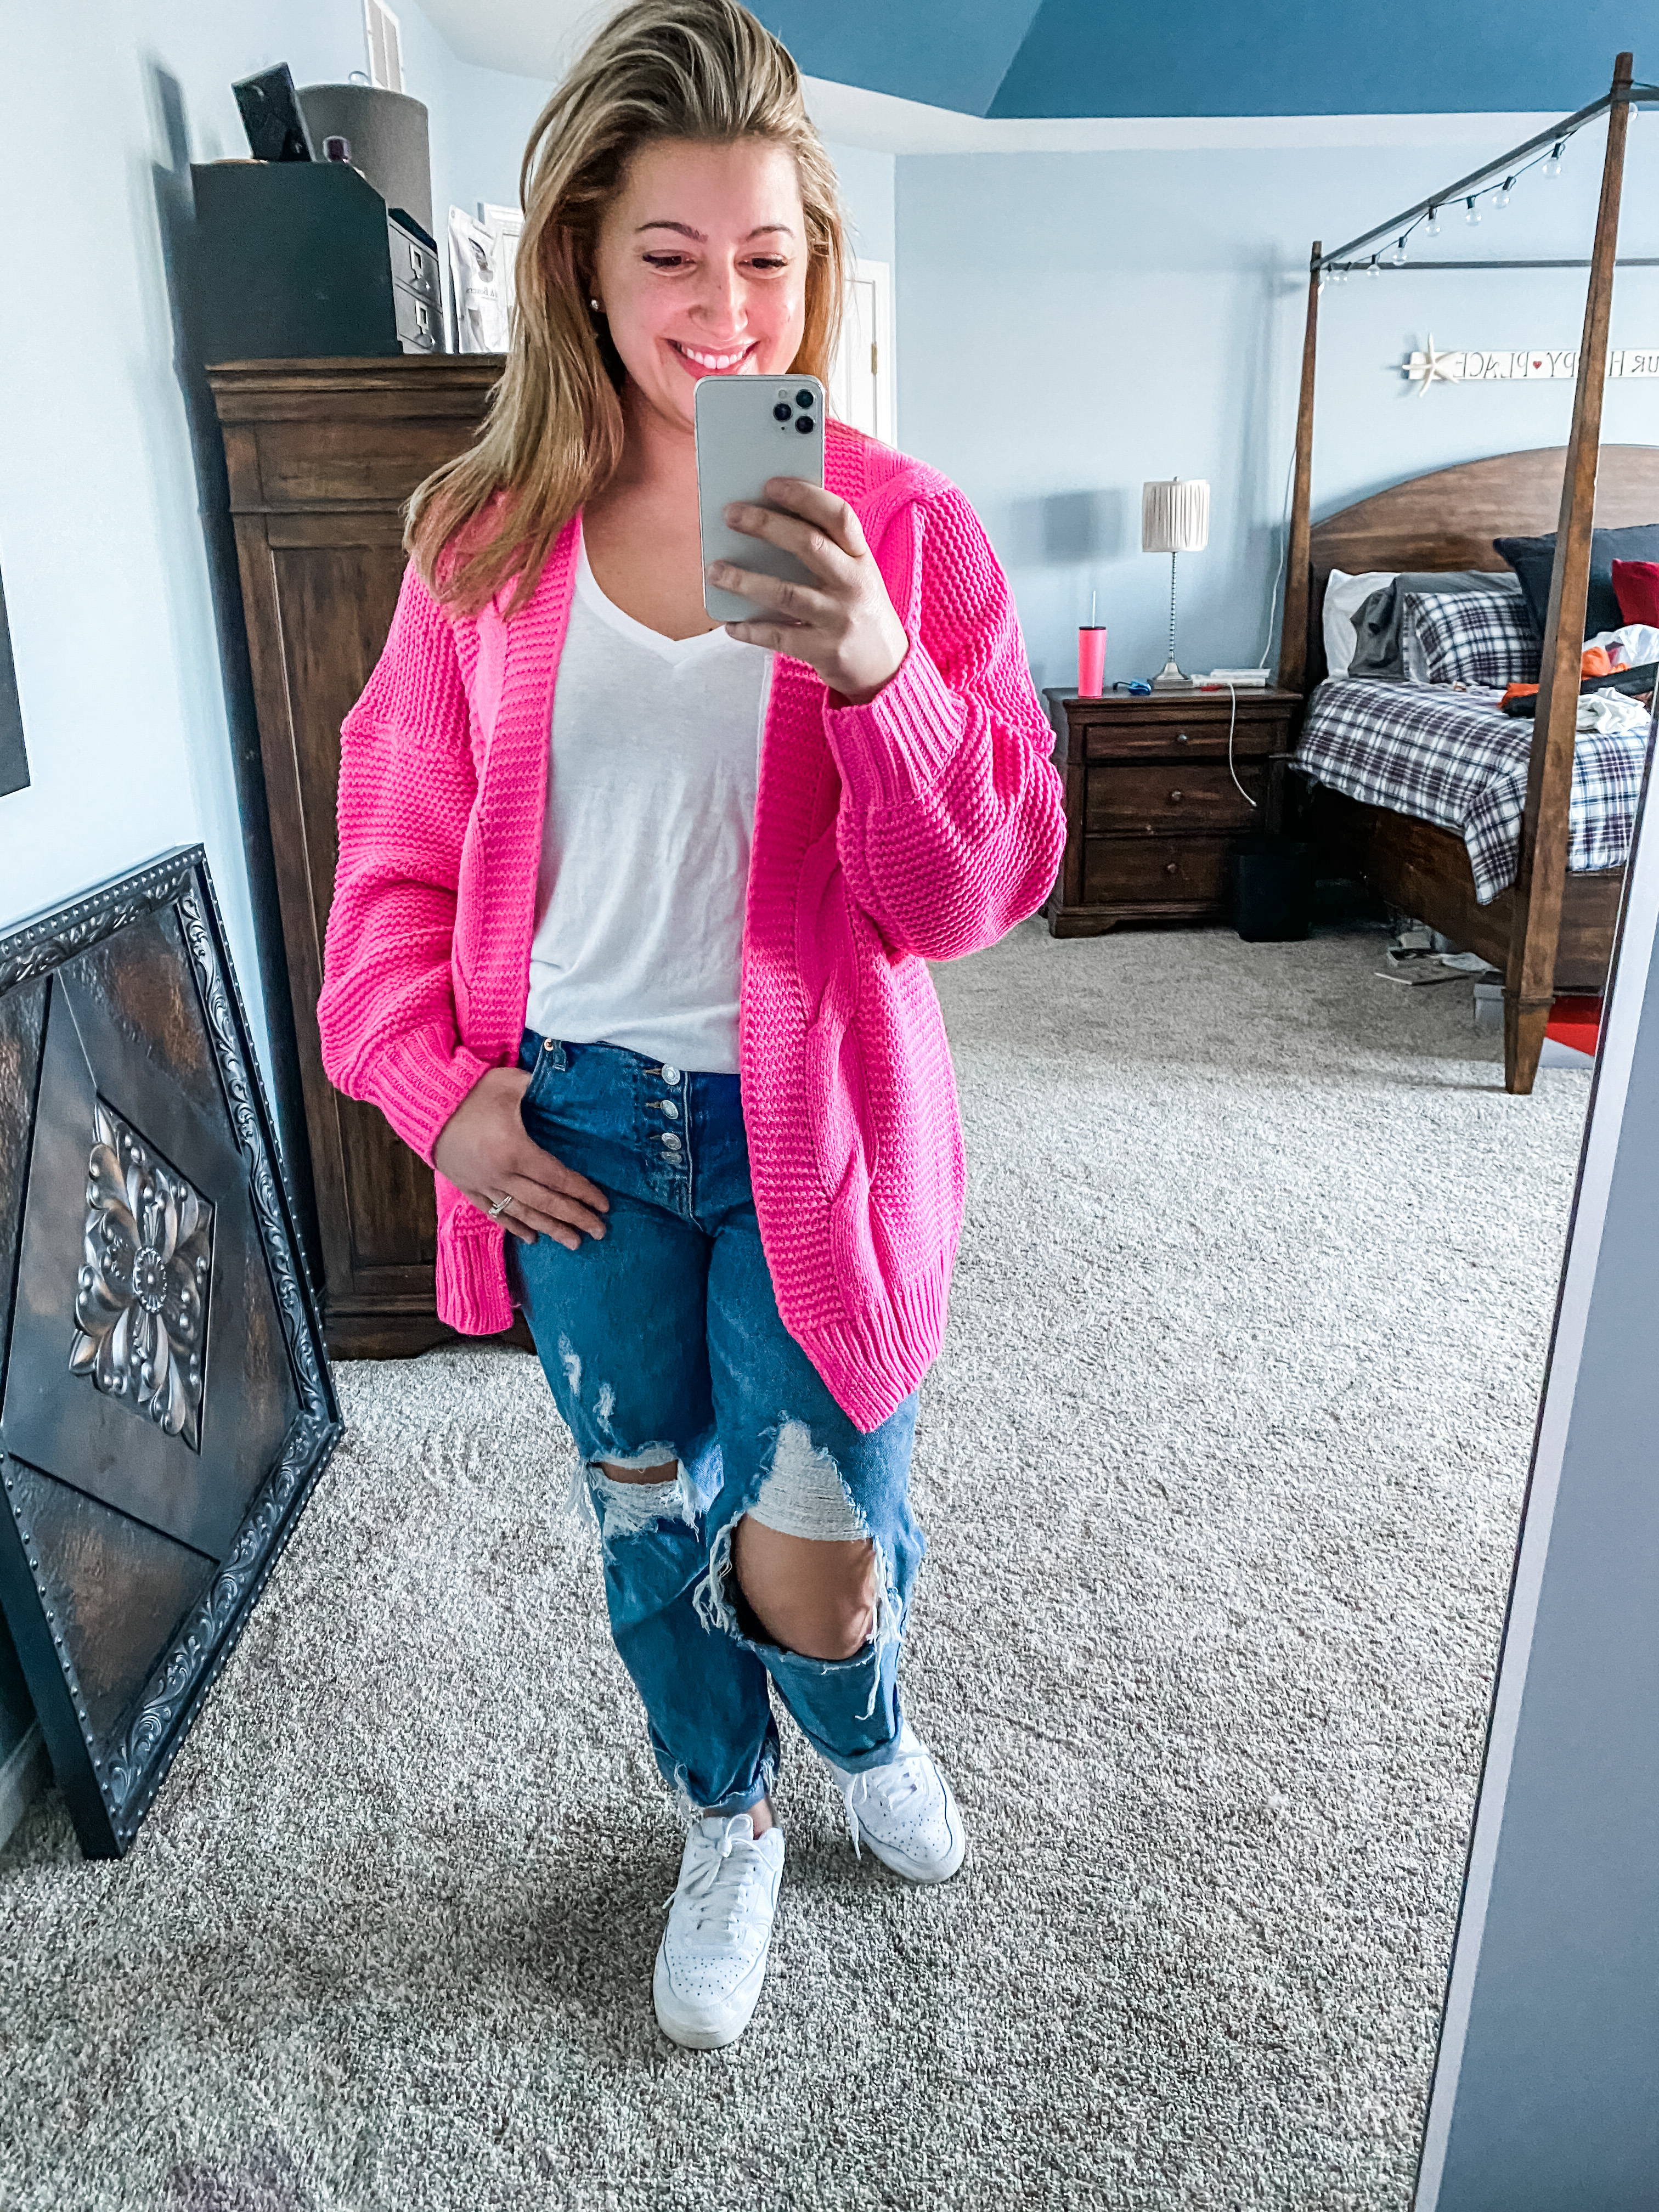 A young woman with blonde hair smiles in the mirror as she holds her camera. She is wearing a hot pink long cardigan, white tank top, distressed jeans and white sneakers. 